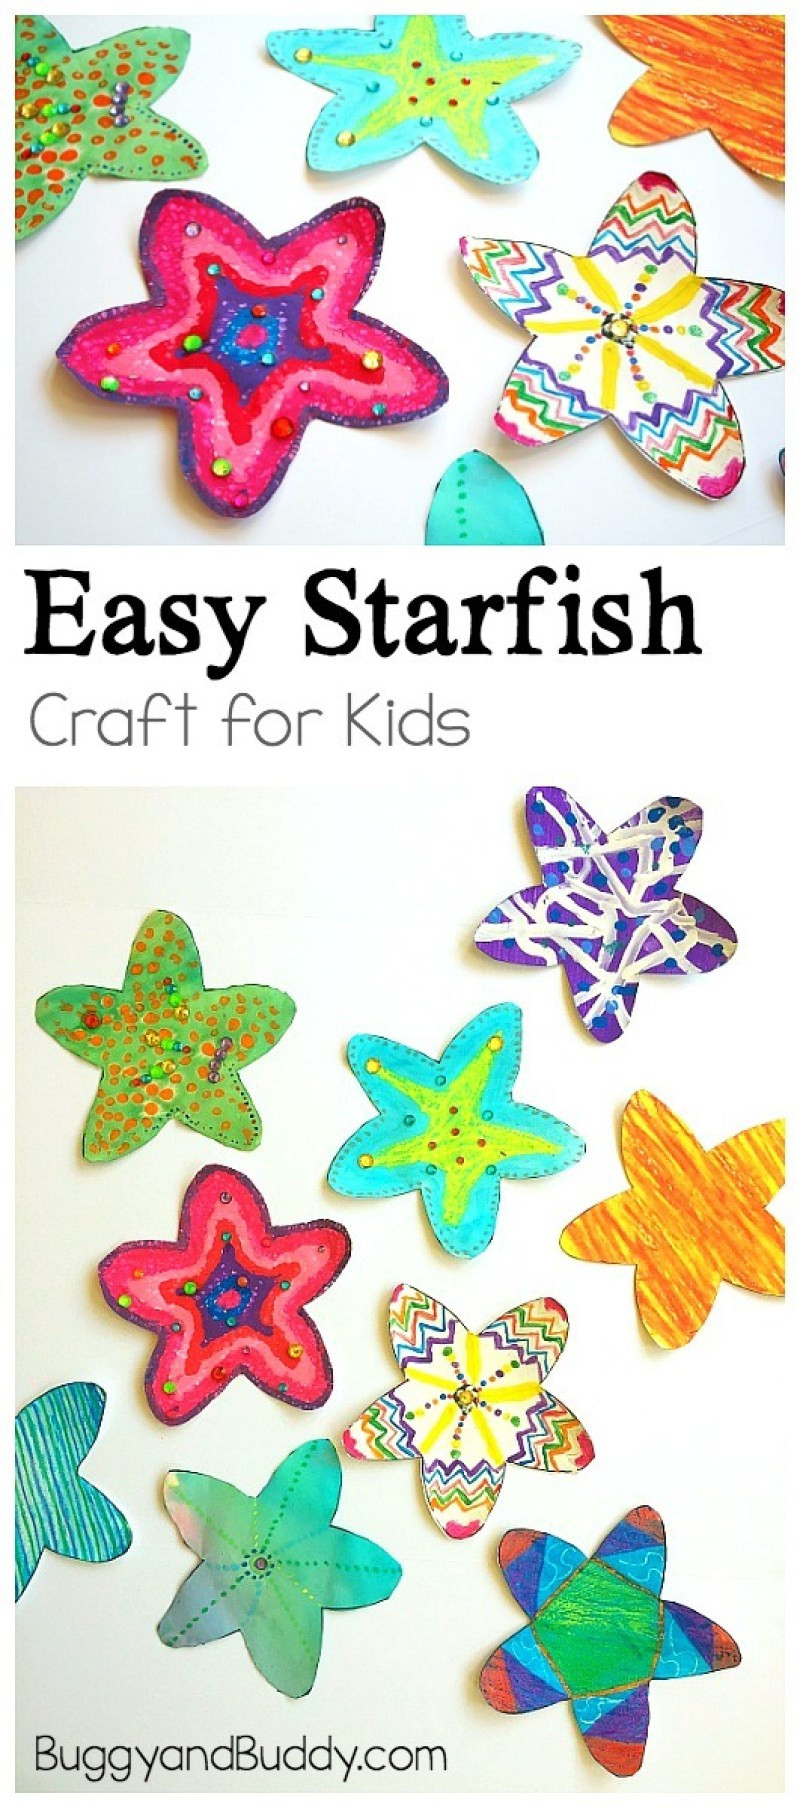 Simple Crafts For Toddlers
 12 Favorite Easy Summer Crafts for Kids on Love the Day